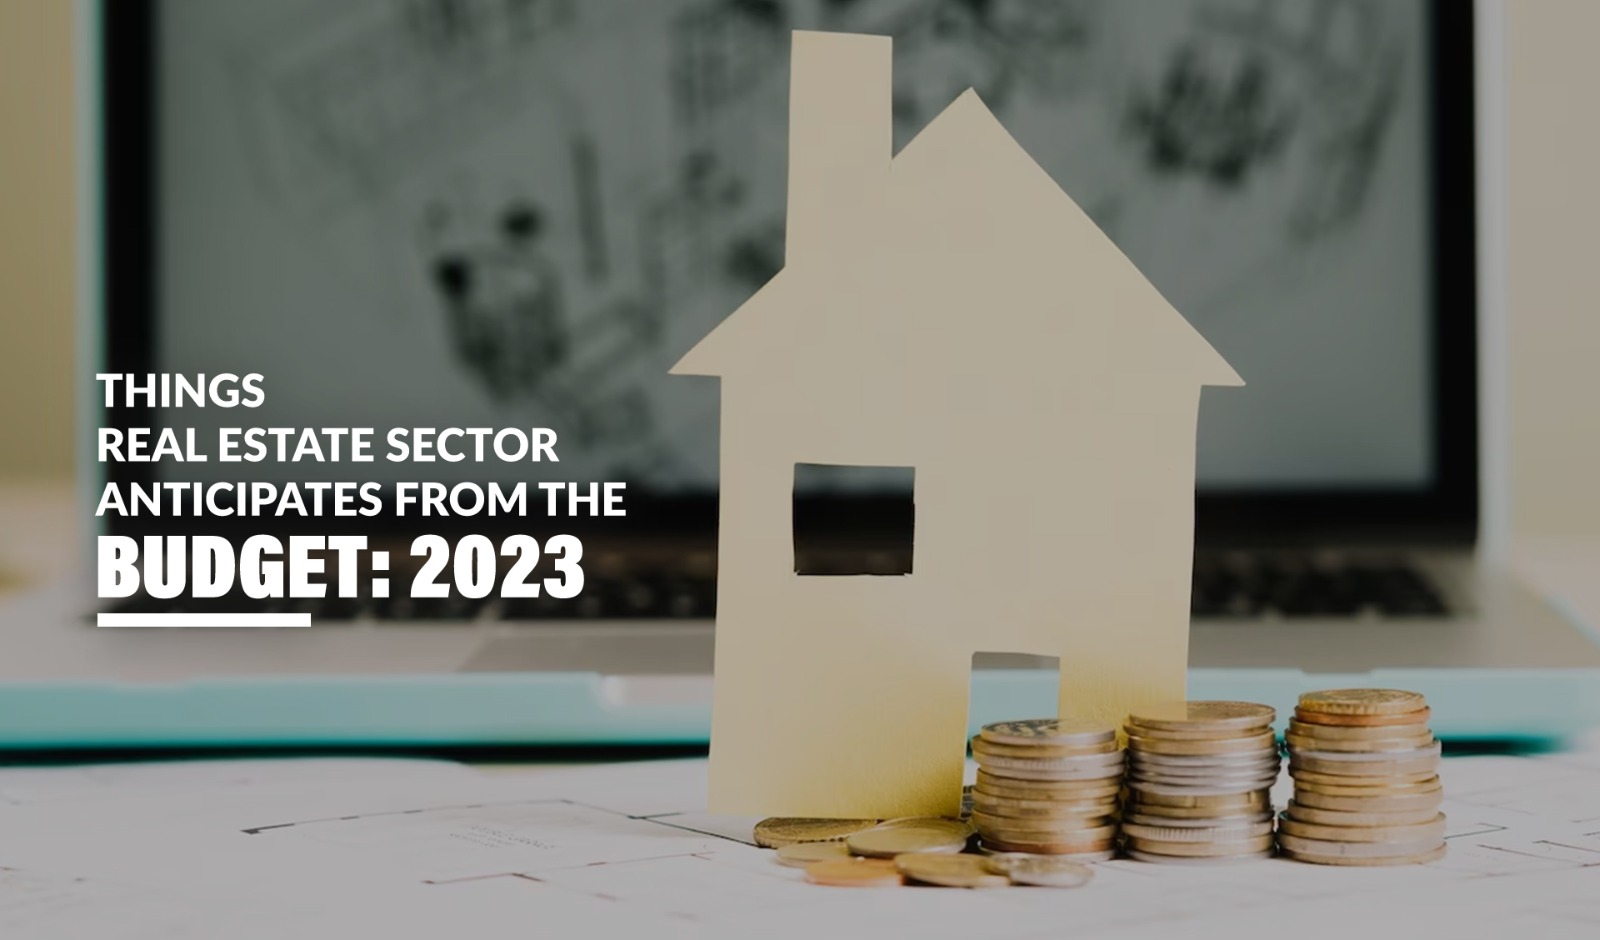 Things Real Estate Sector Anticipates from The Budget 2023